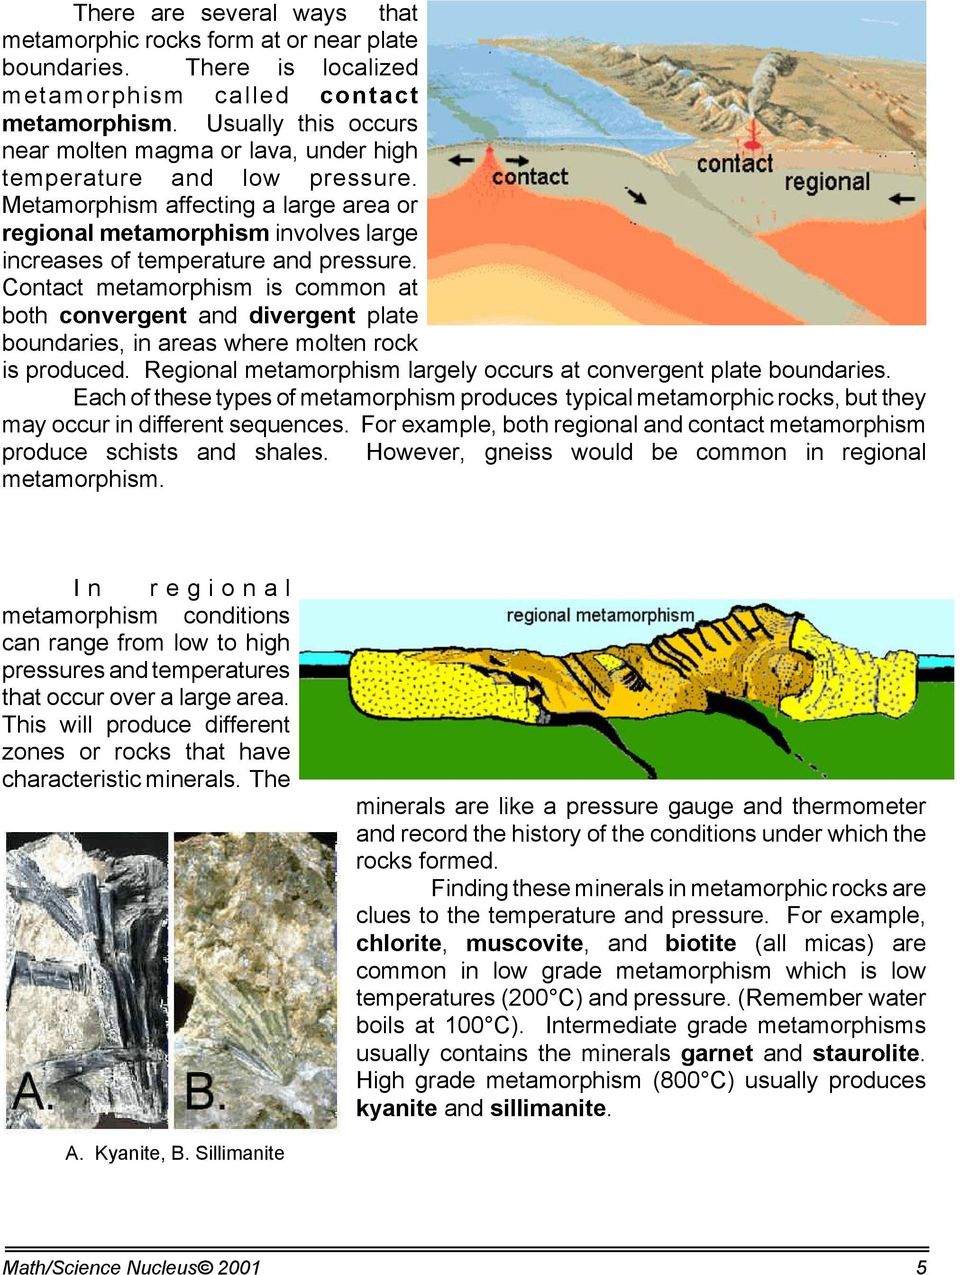 Metamorphism affecting a large area or regional metamorphism involves large increases of temperature and pressure.